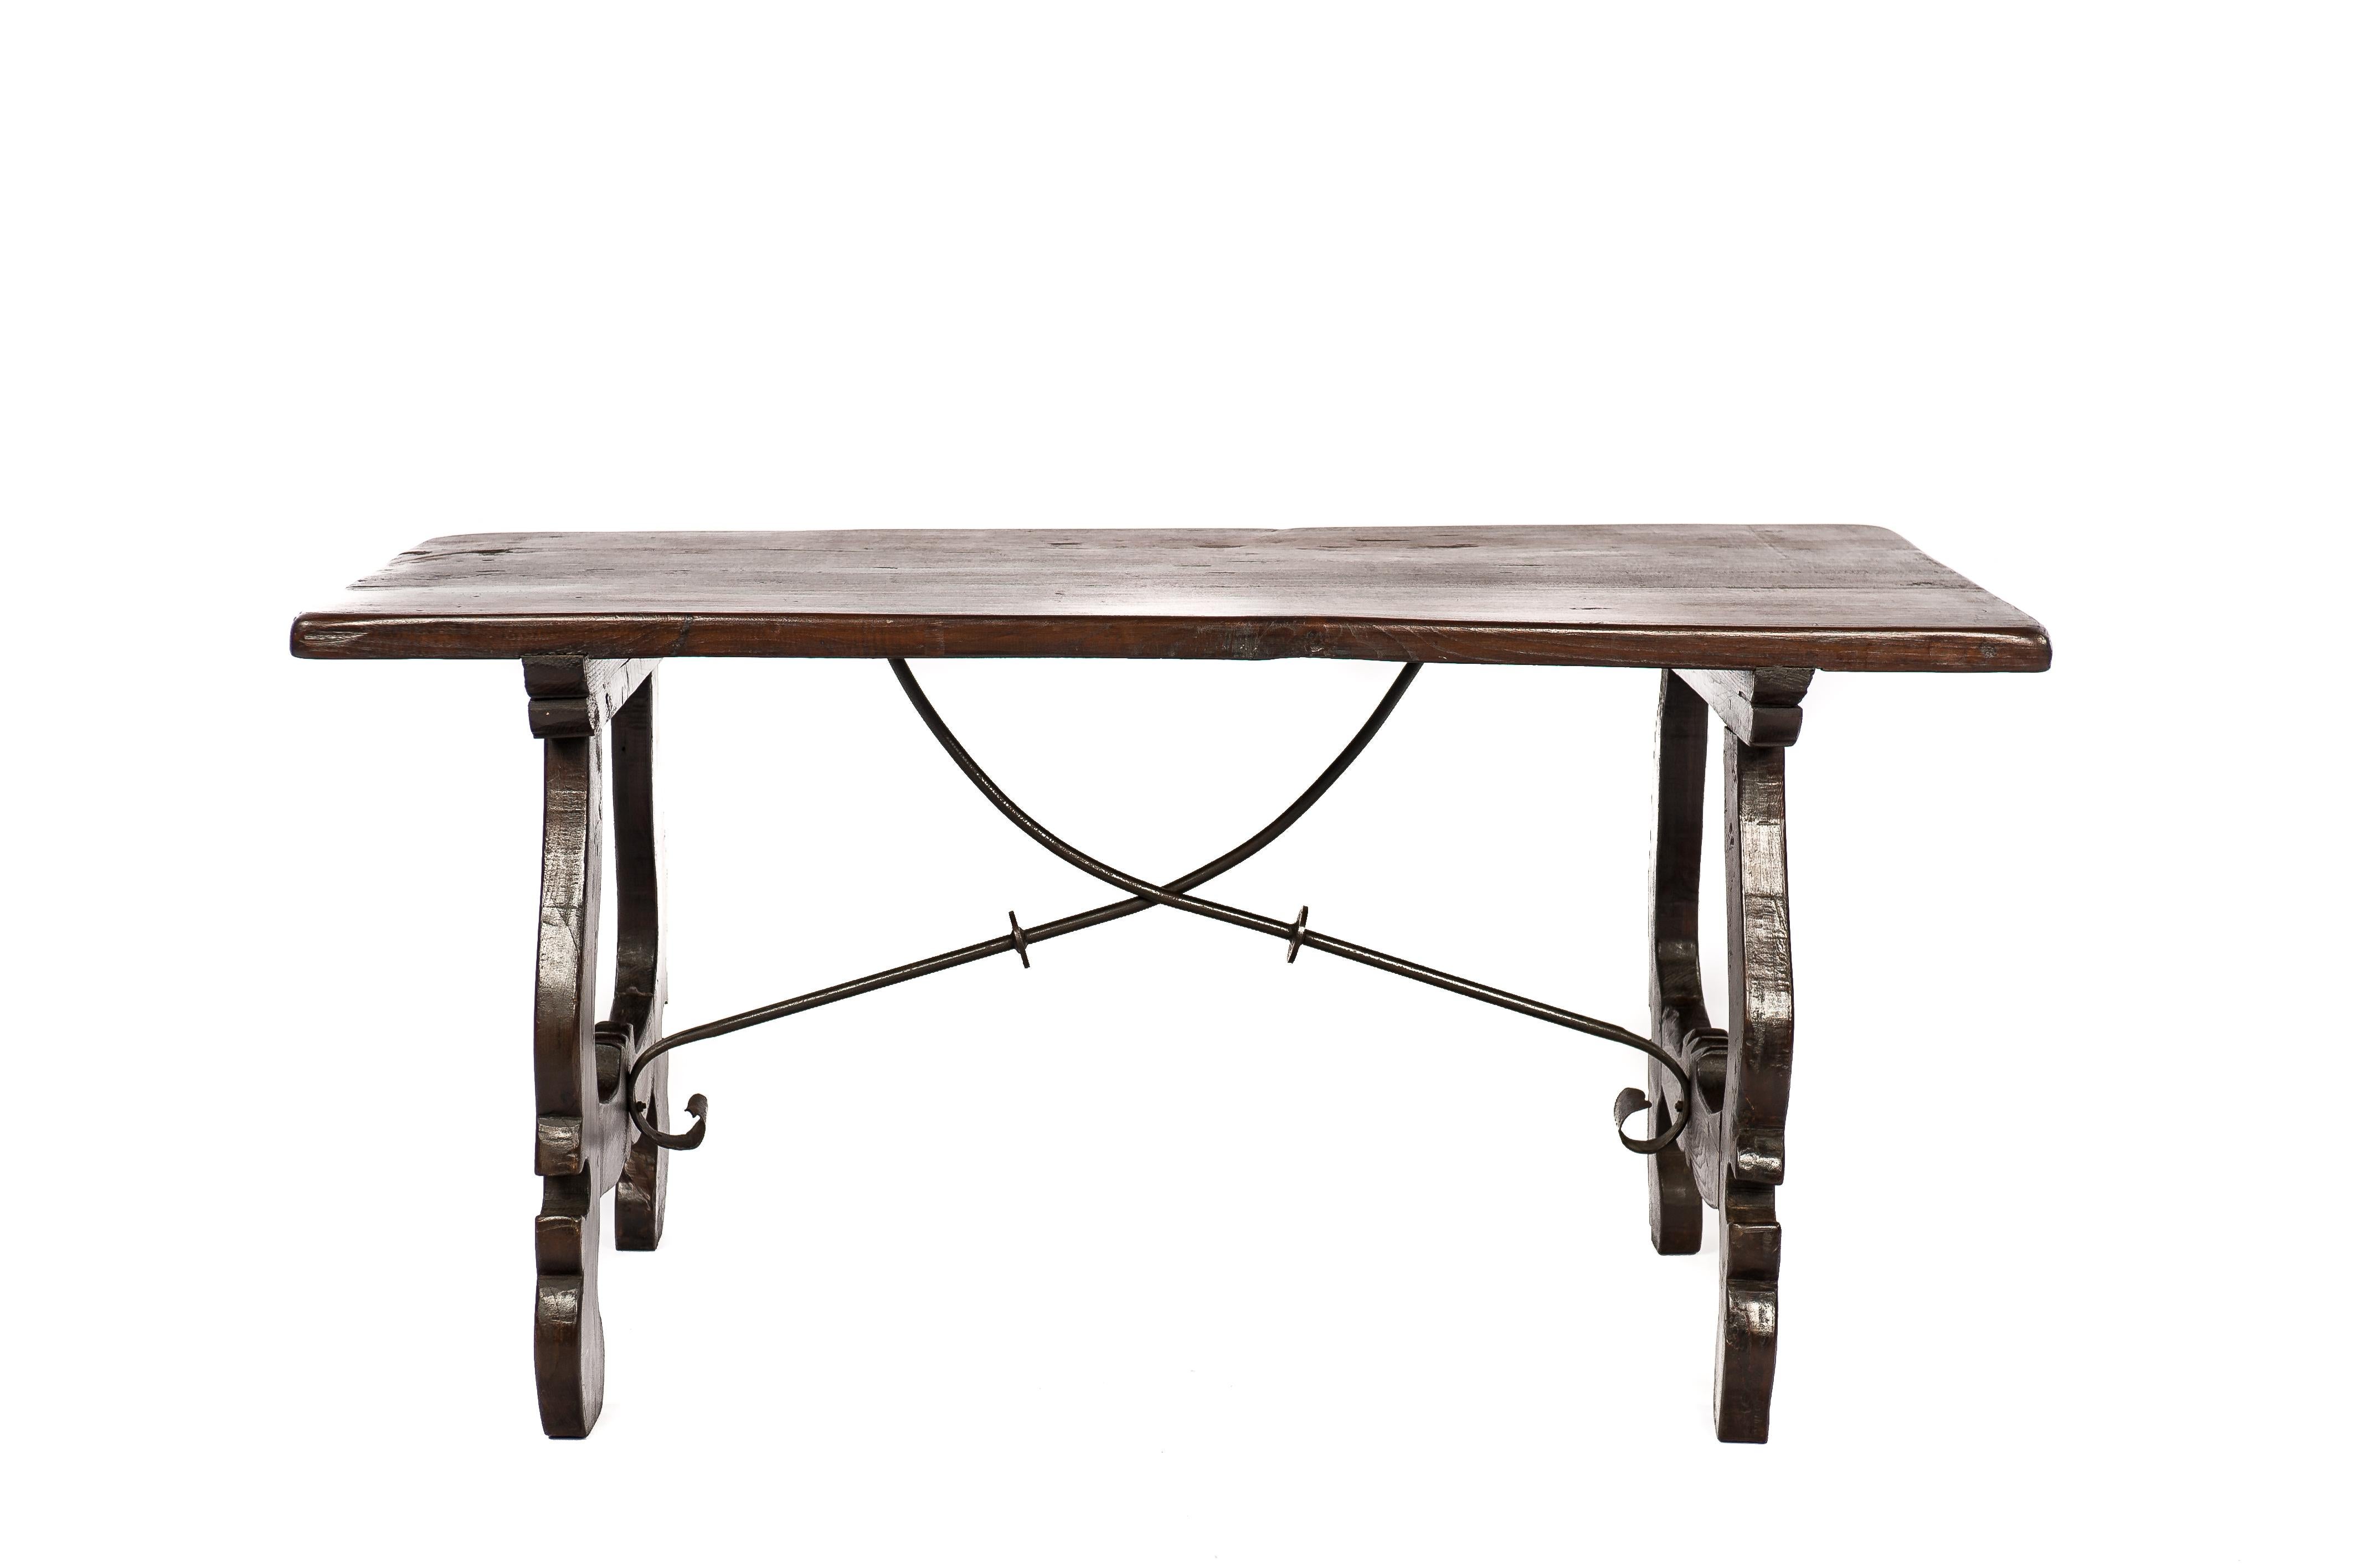 Baroque Antique 19th century dark brown chestnut baroque dining table with lyre legs For Sale